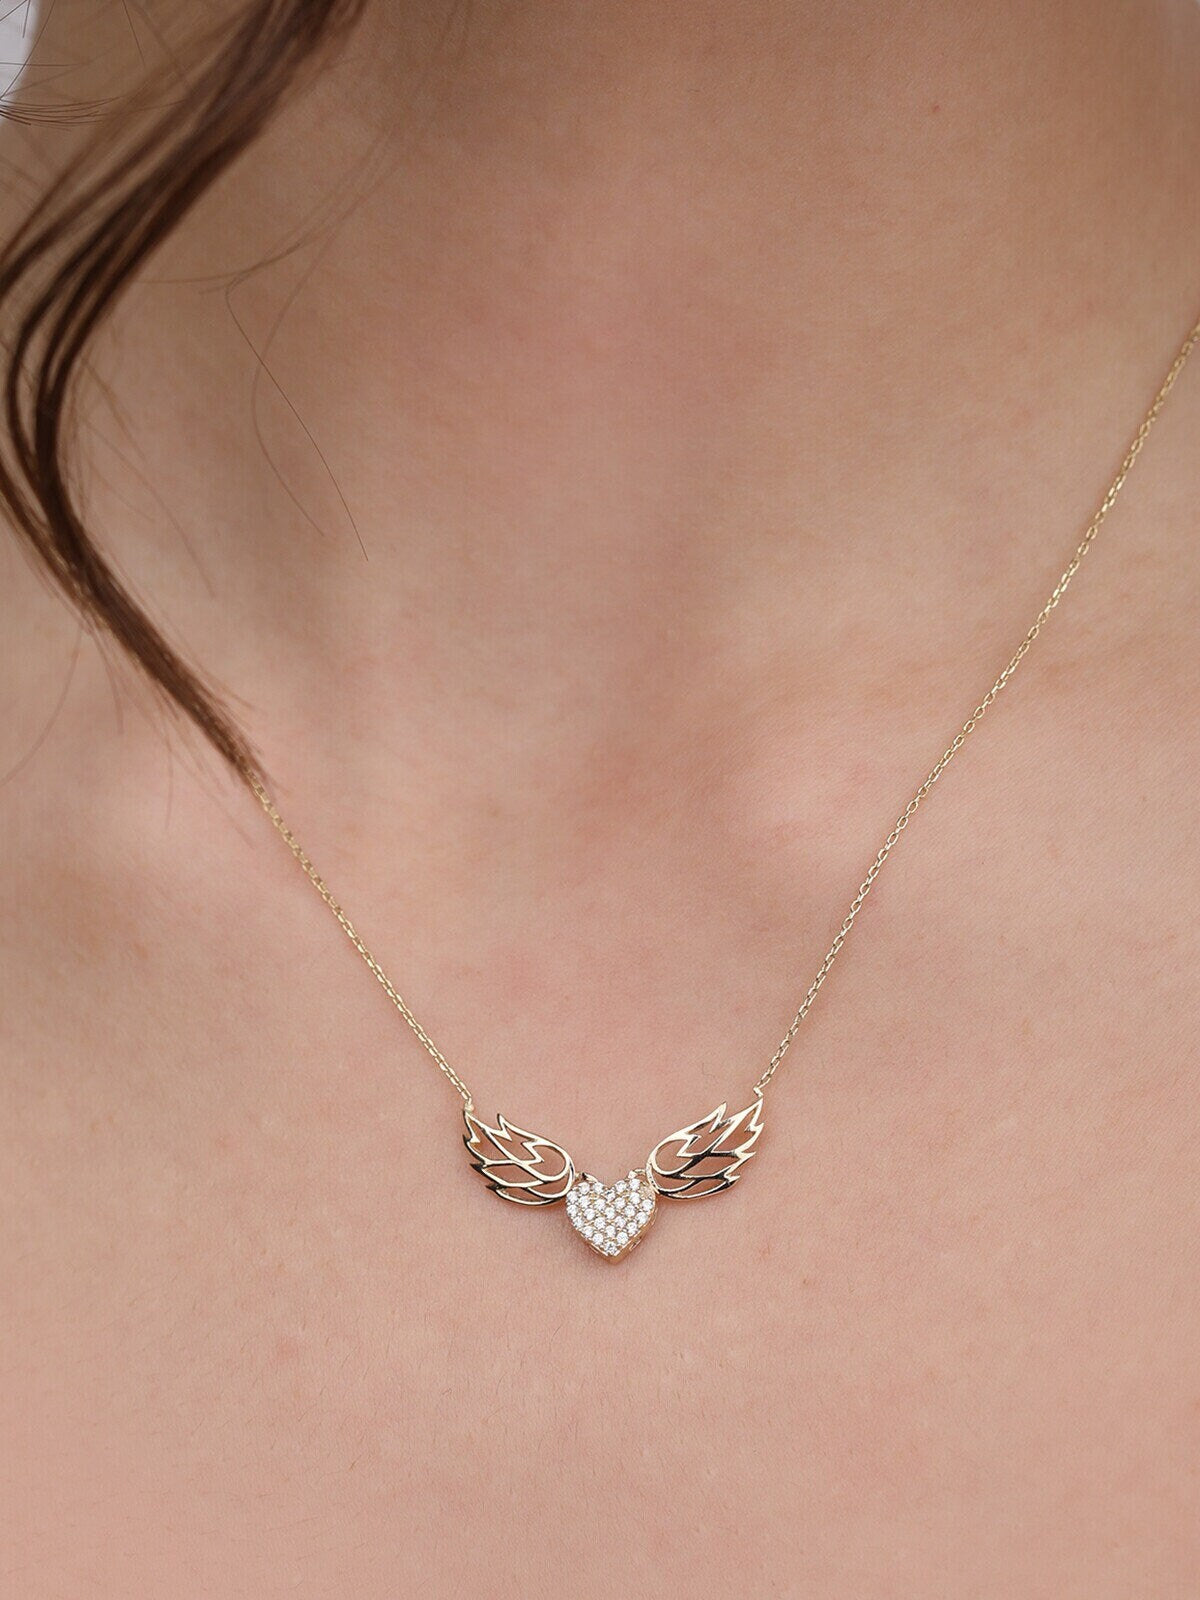 14K Gold Cz Angel Wings Necklace